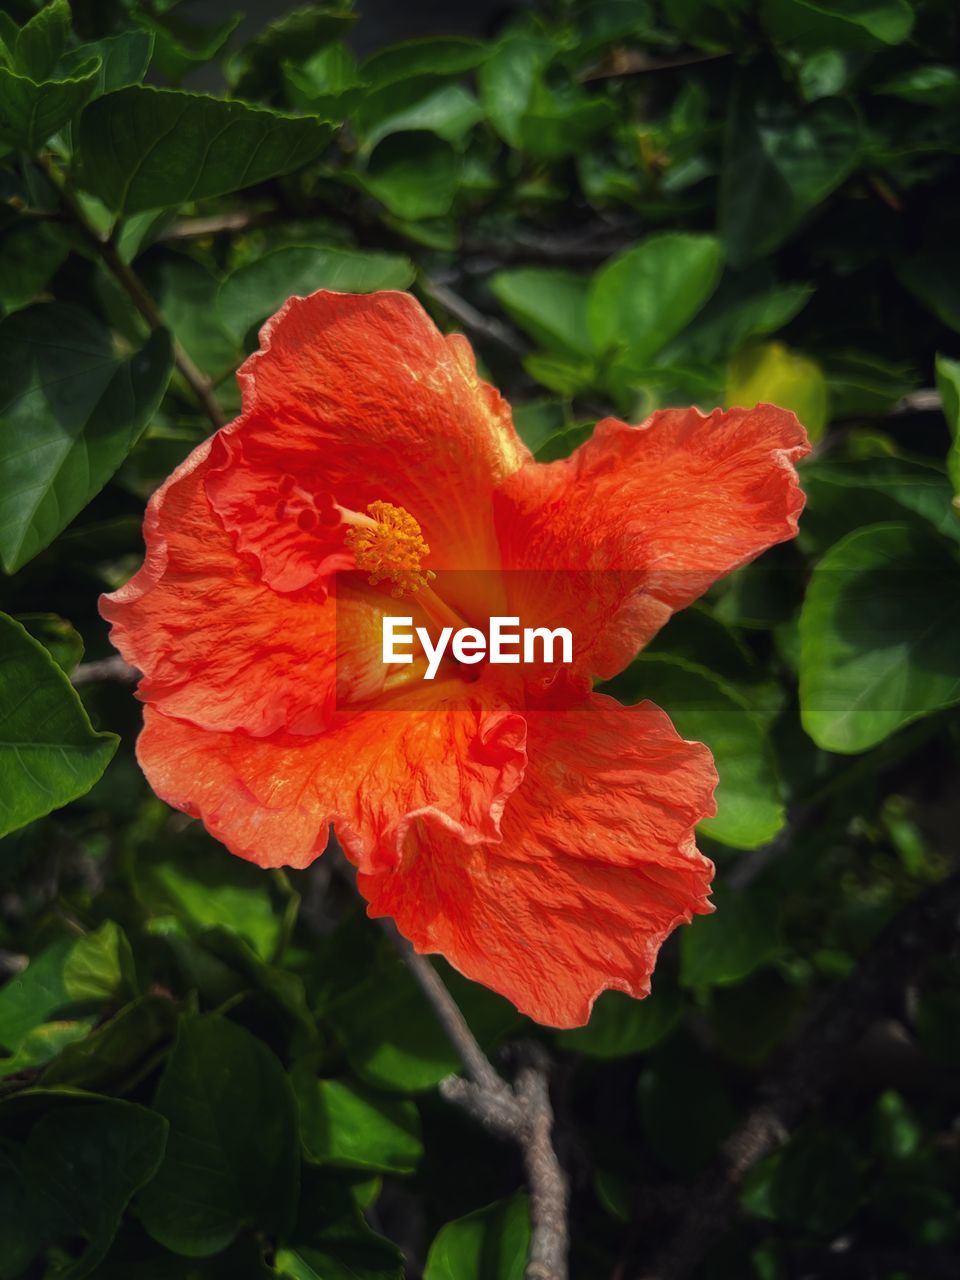 flower, plant, flowering plant, petal, freshness, beauty in nature, hibiscus, inflorescence, flower head, fragility, close-up, growth, nature, plant part, leaf, red, no people, botany, pollen, orange color, outdoors, stamen, green, blossom, day, springtime